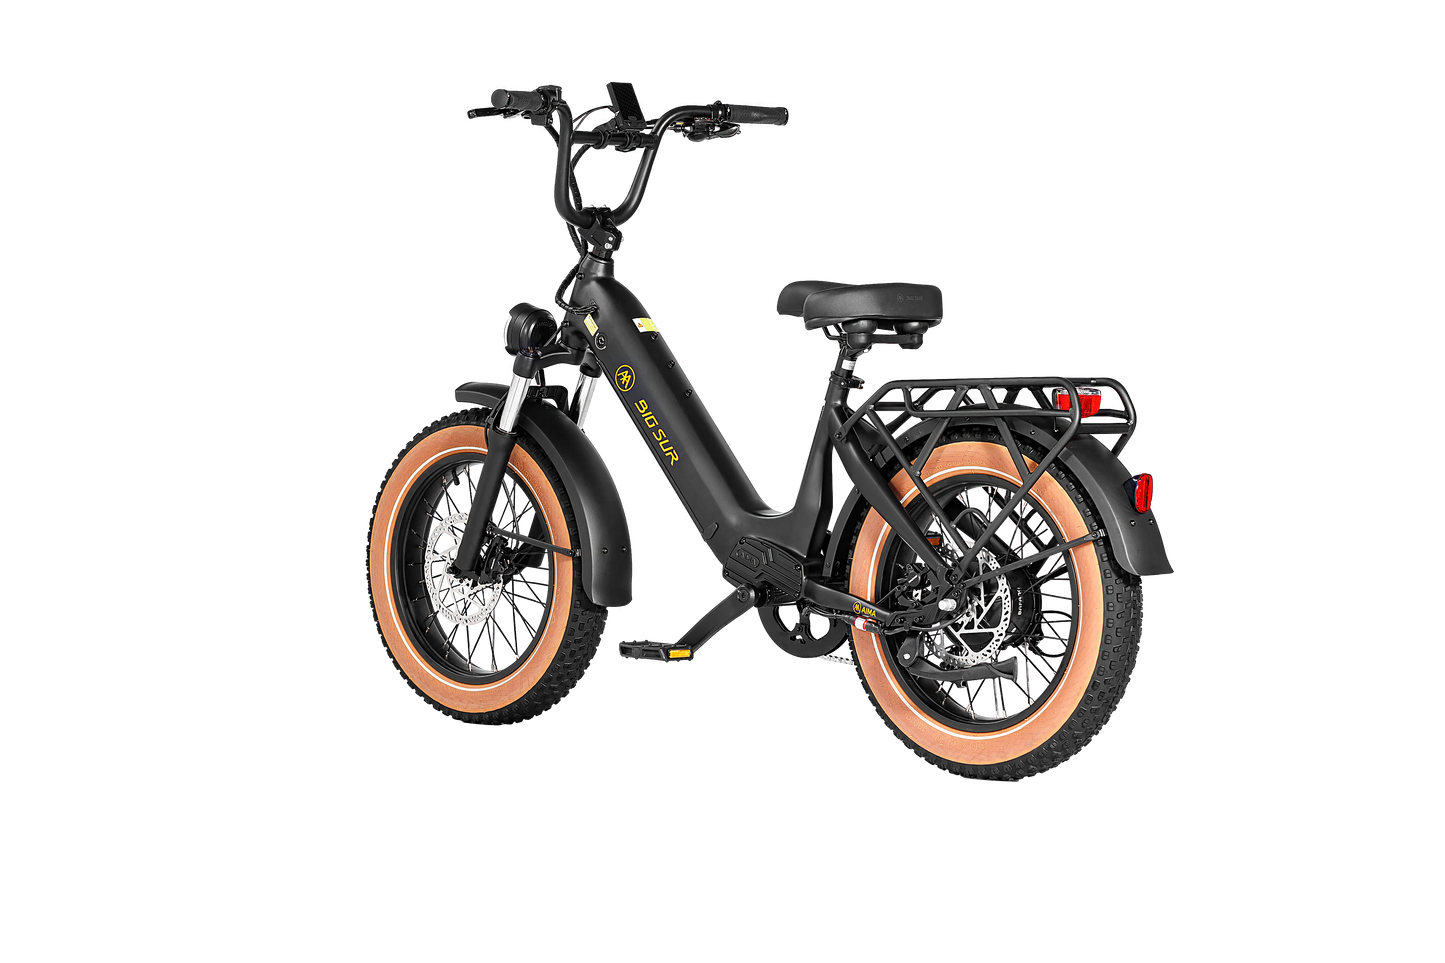 The AIMA - Big Sur Sport is a black electric bike with tan fat tires, a padded seat, rear cargo rack, and front suspension. It boasts a class 2/3 rating and is displayed on a sleek black background.